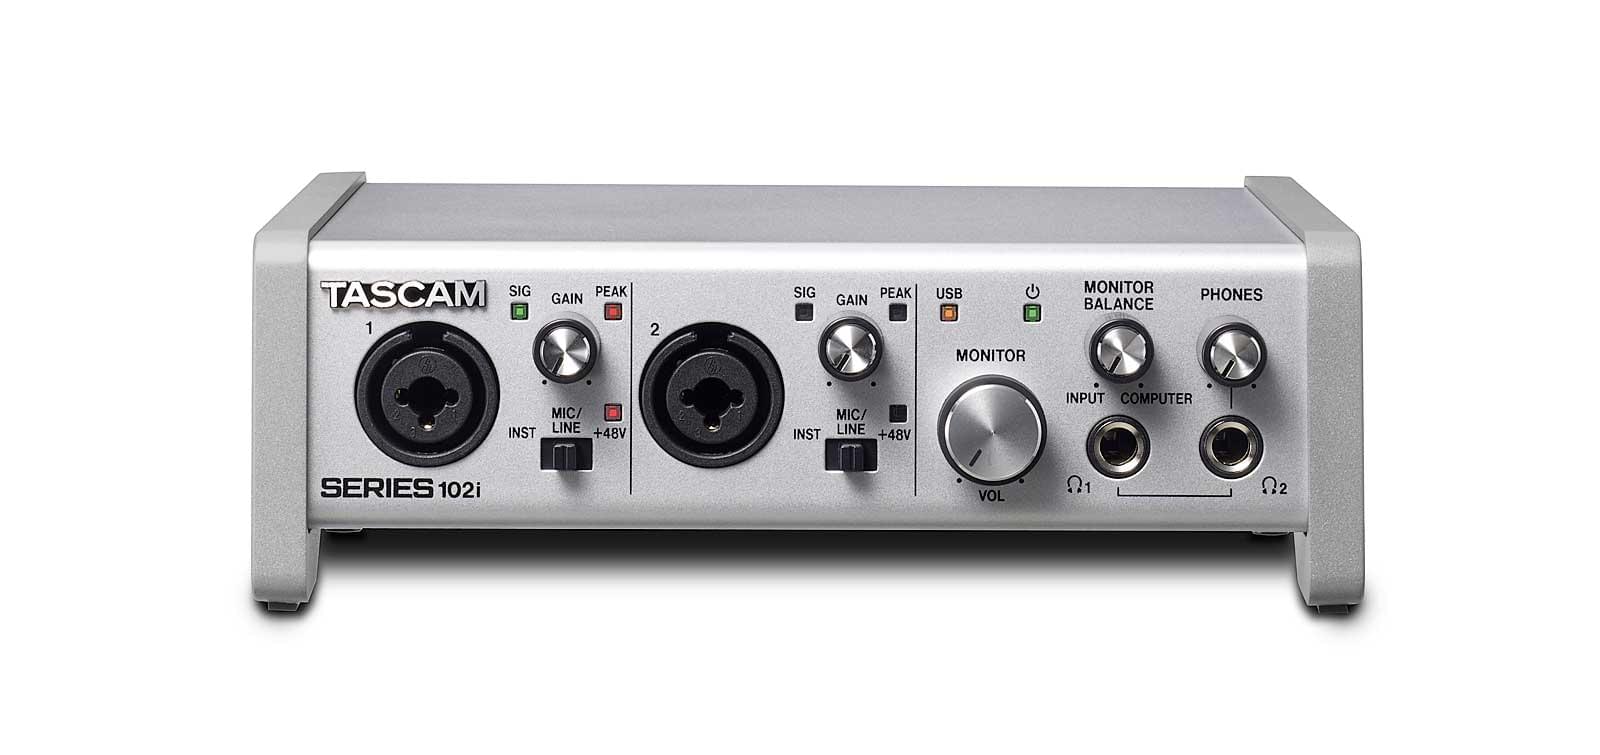 USB Audio/MIDI Interface With DSP Mixer (10 in, 4 out) | Tascam SERIES 102i